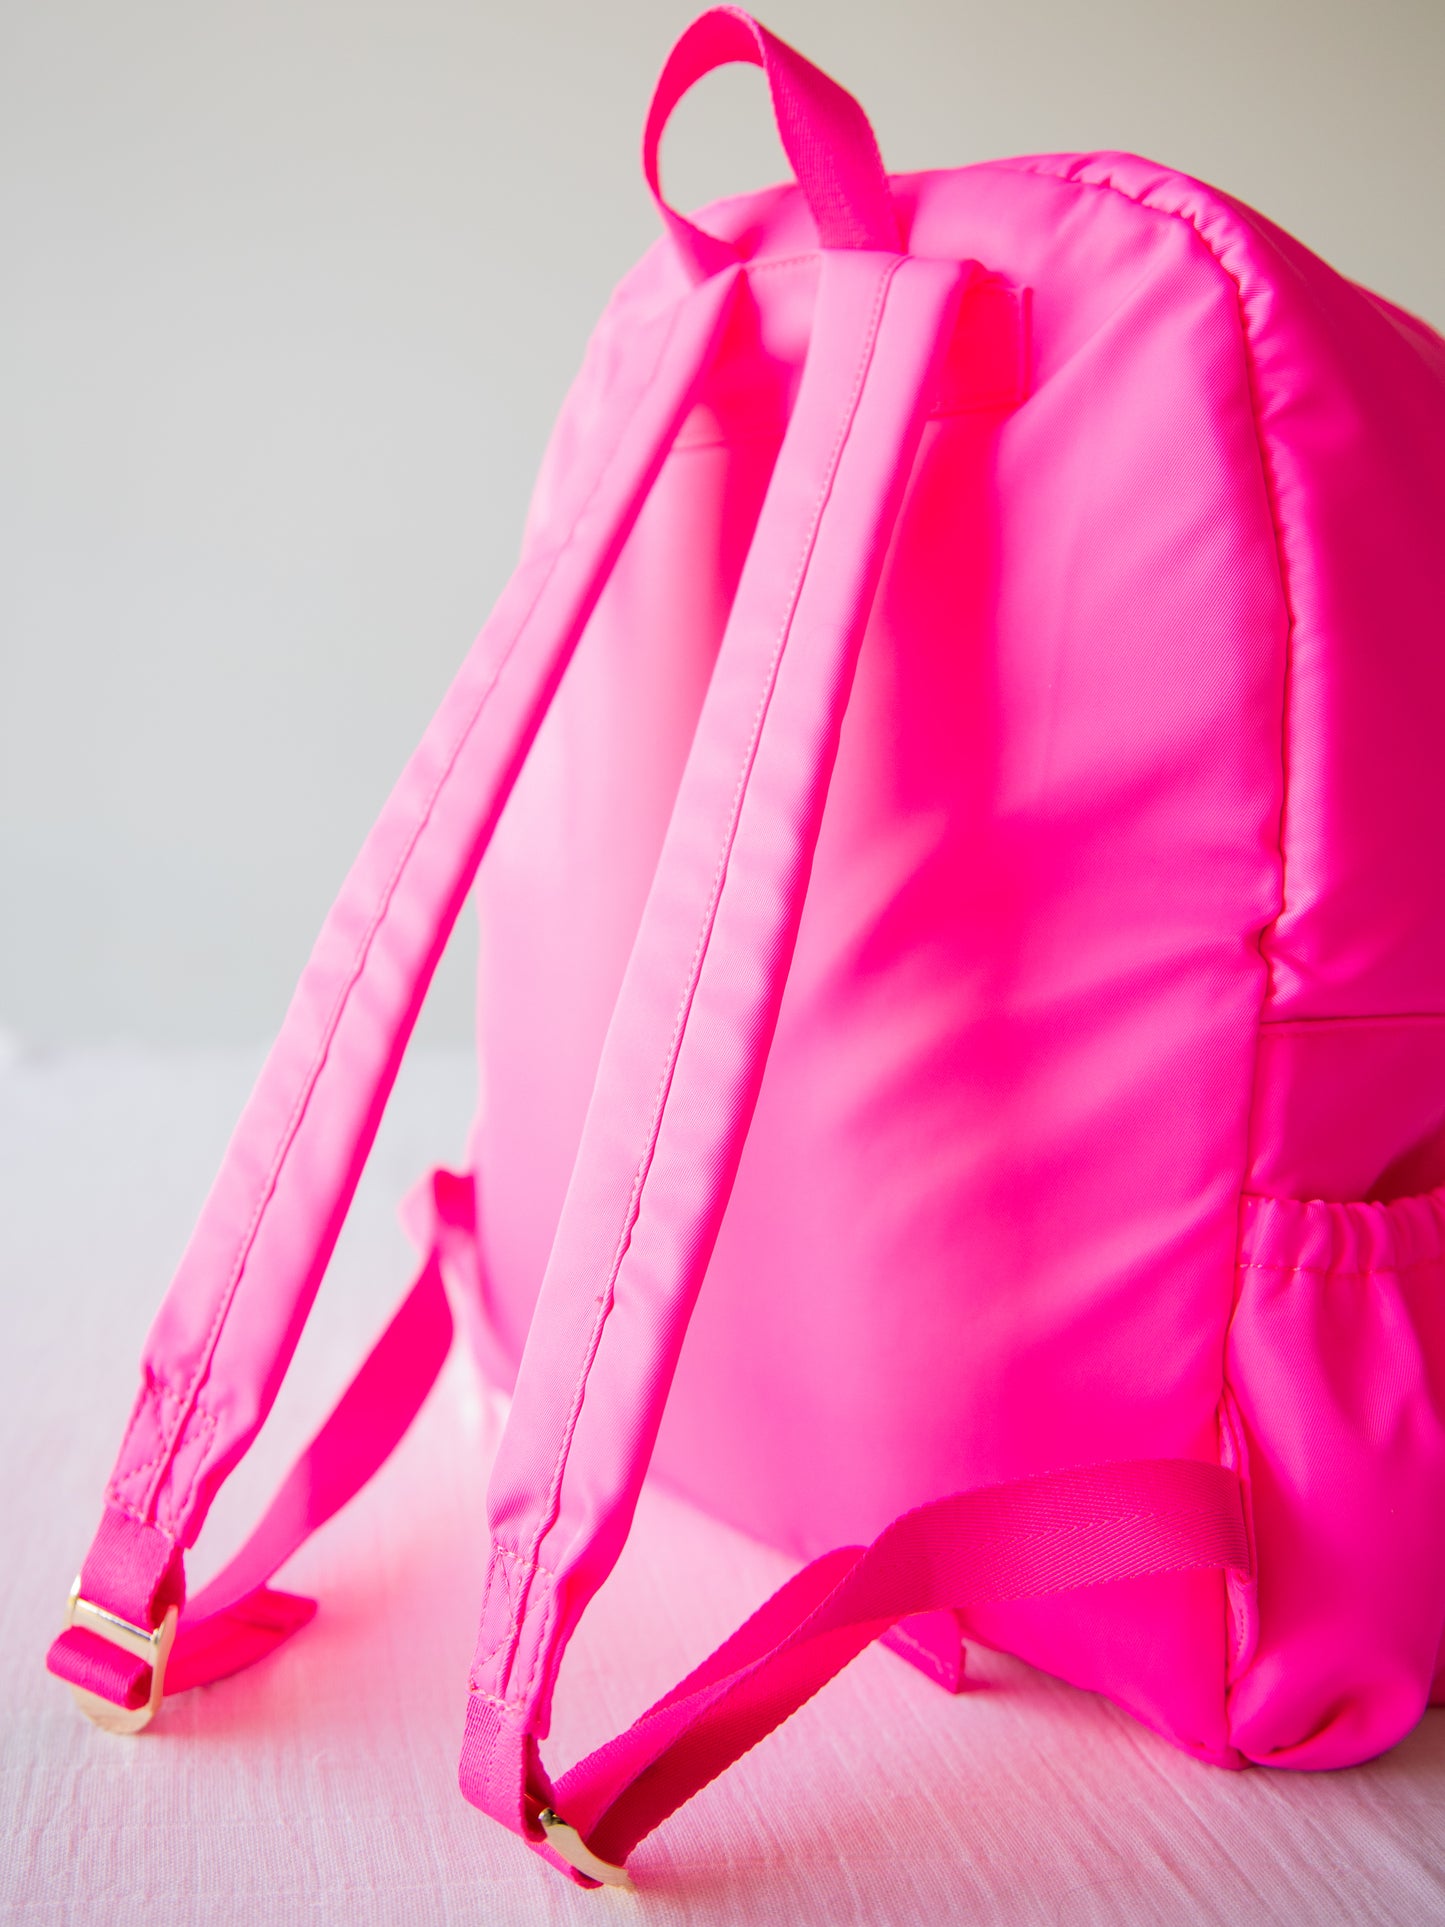 Retro Backpack - Vibrant Pink